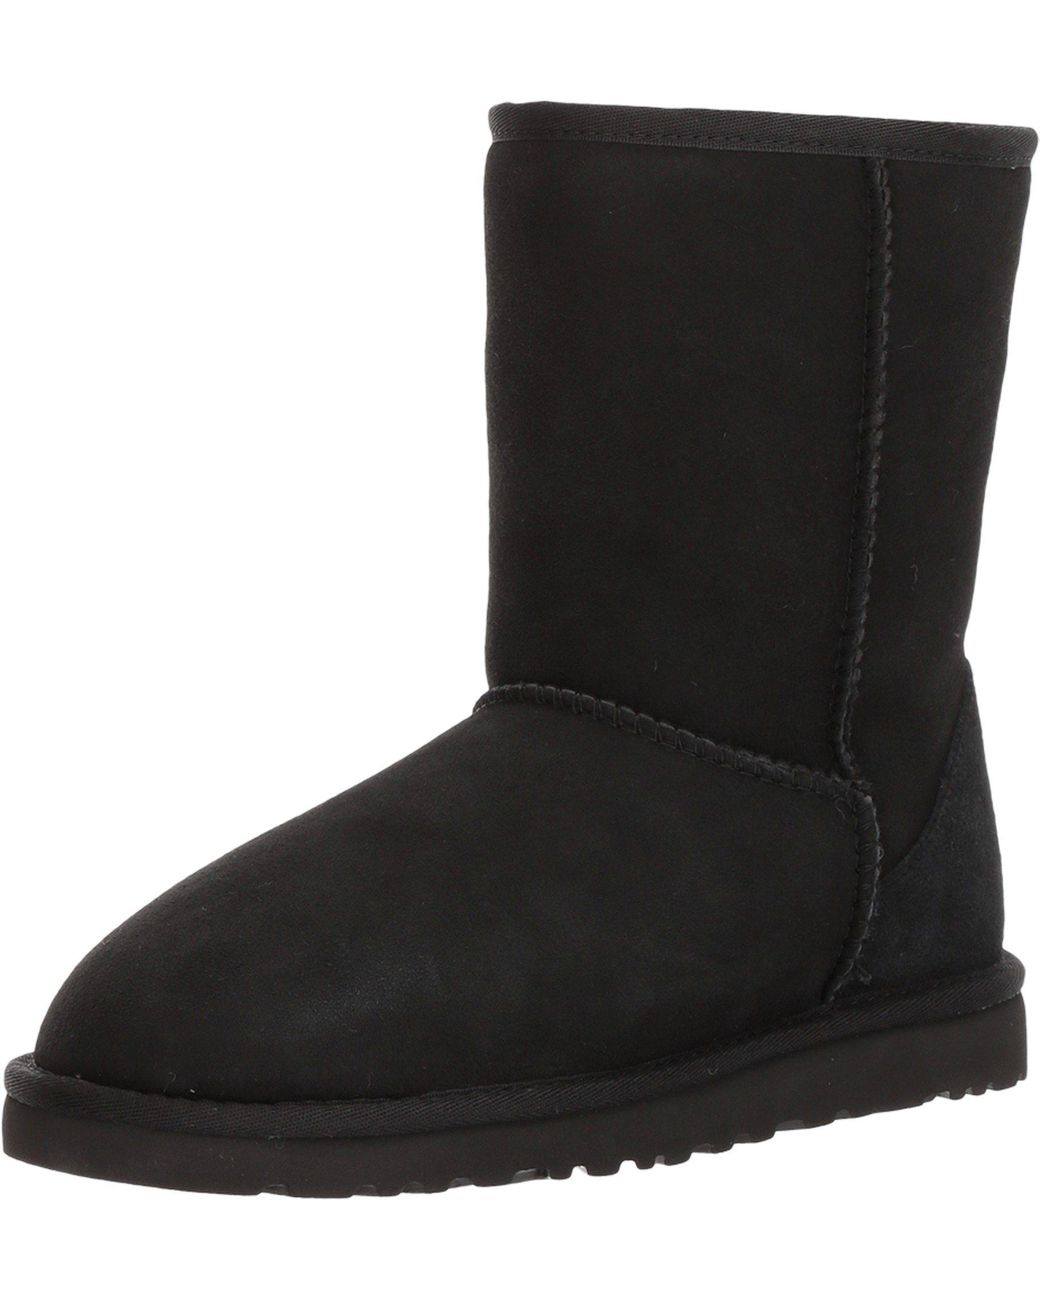 UGG Leather Classic Short Boot in Black for Men - Save 64% - Lyst